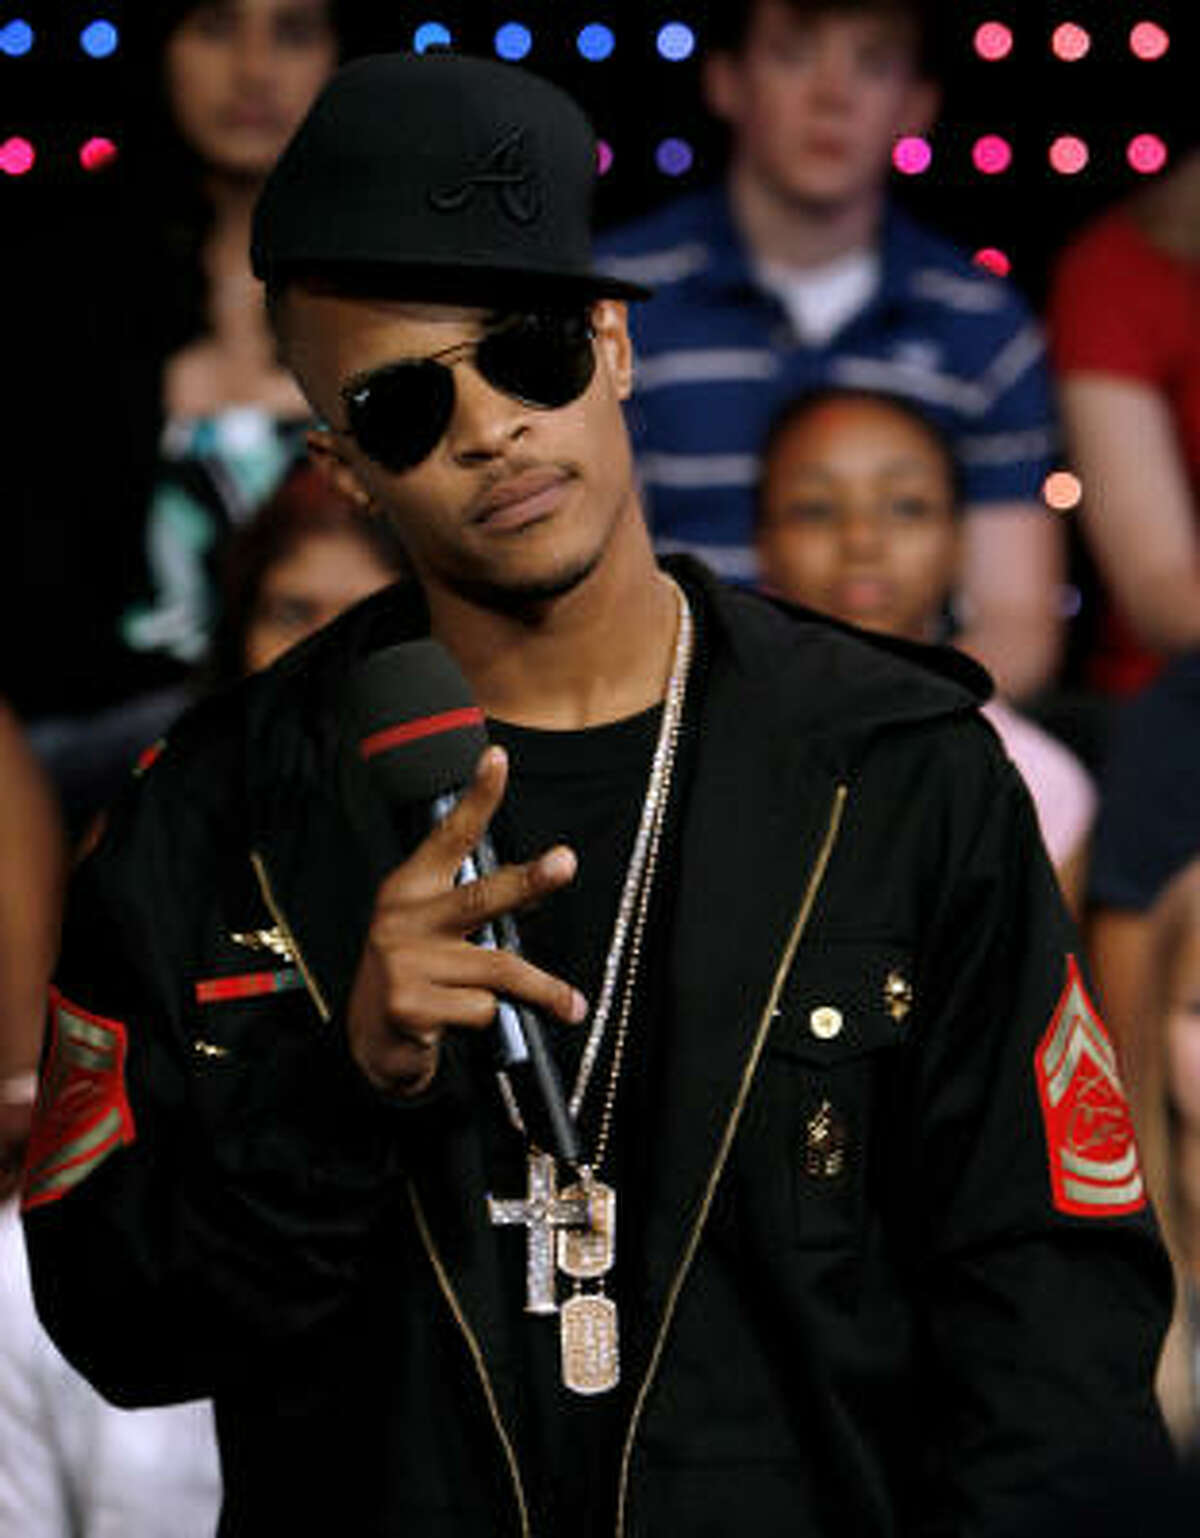 T.I. was all flash with his chains and aviator sunglasses.